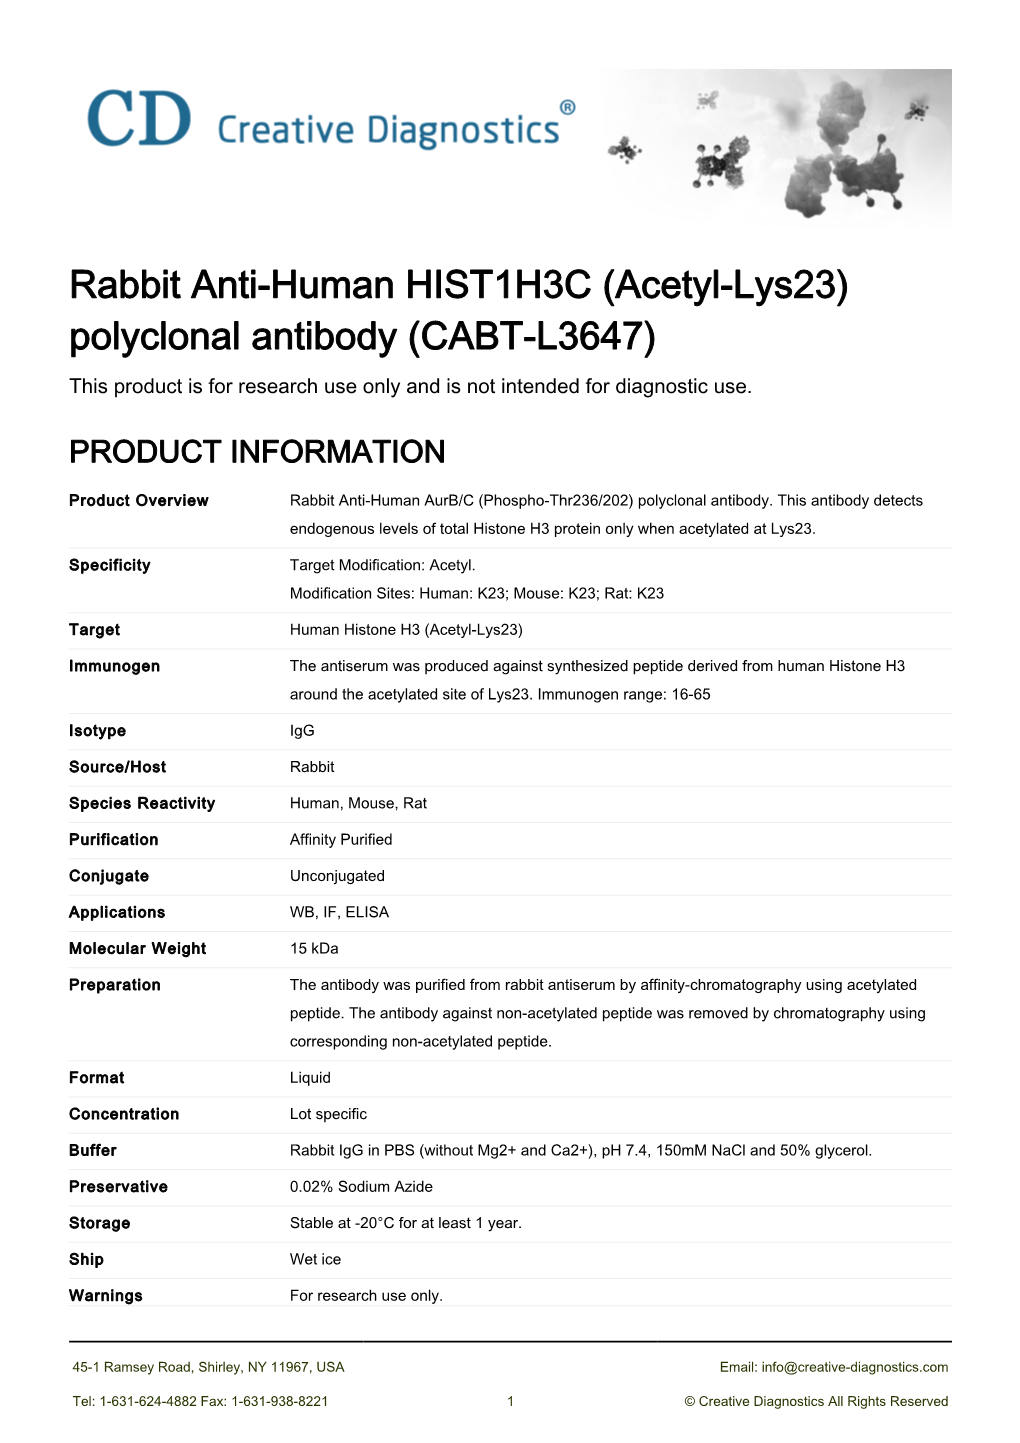 Rabbit Anti-Human HIST1H3C (Acetyl-Lys23) Polyclonal Antibody (CABT-L3647) This Product Is for Research Use Only and Is Not Intended for Diagnostic Use